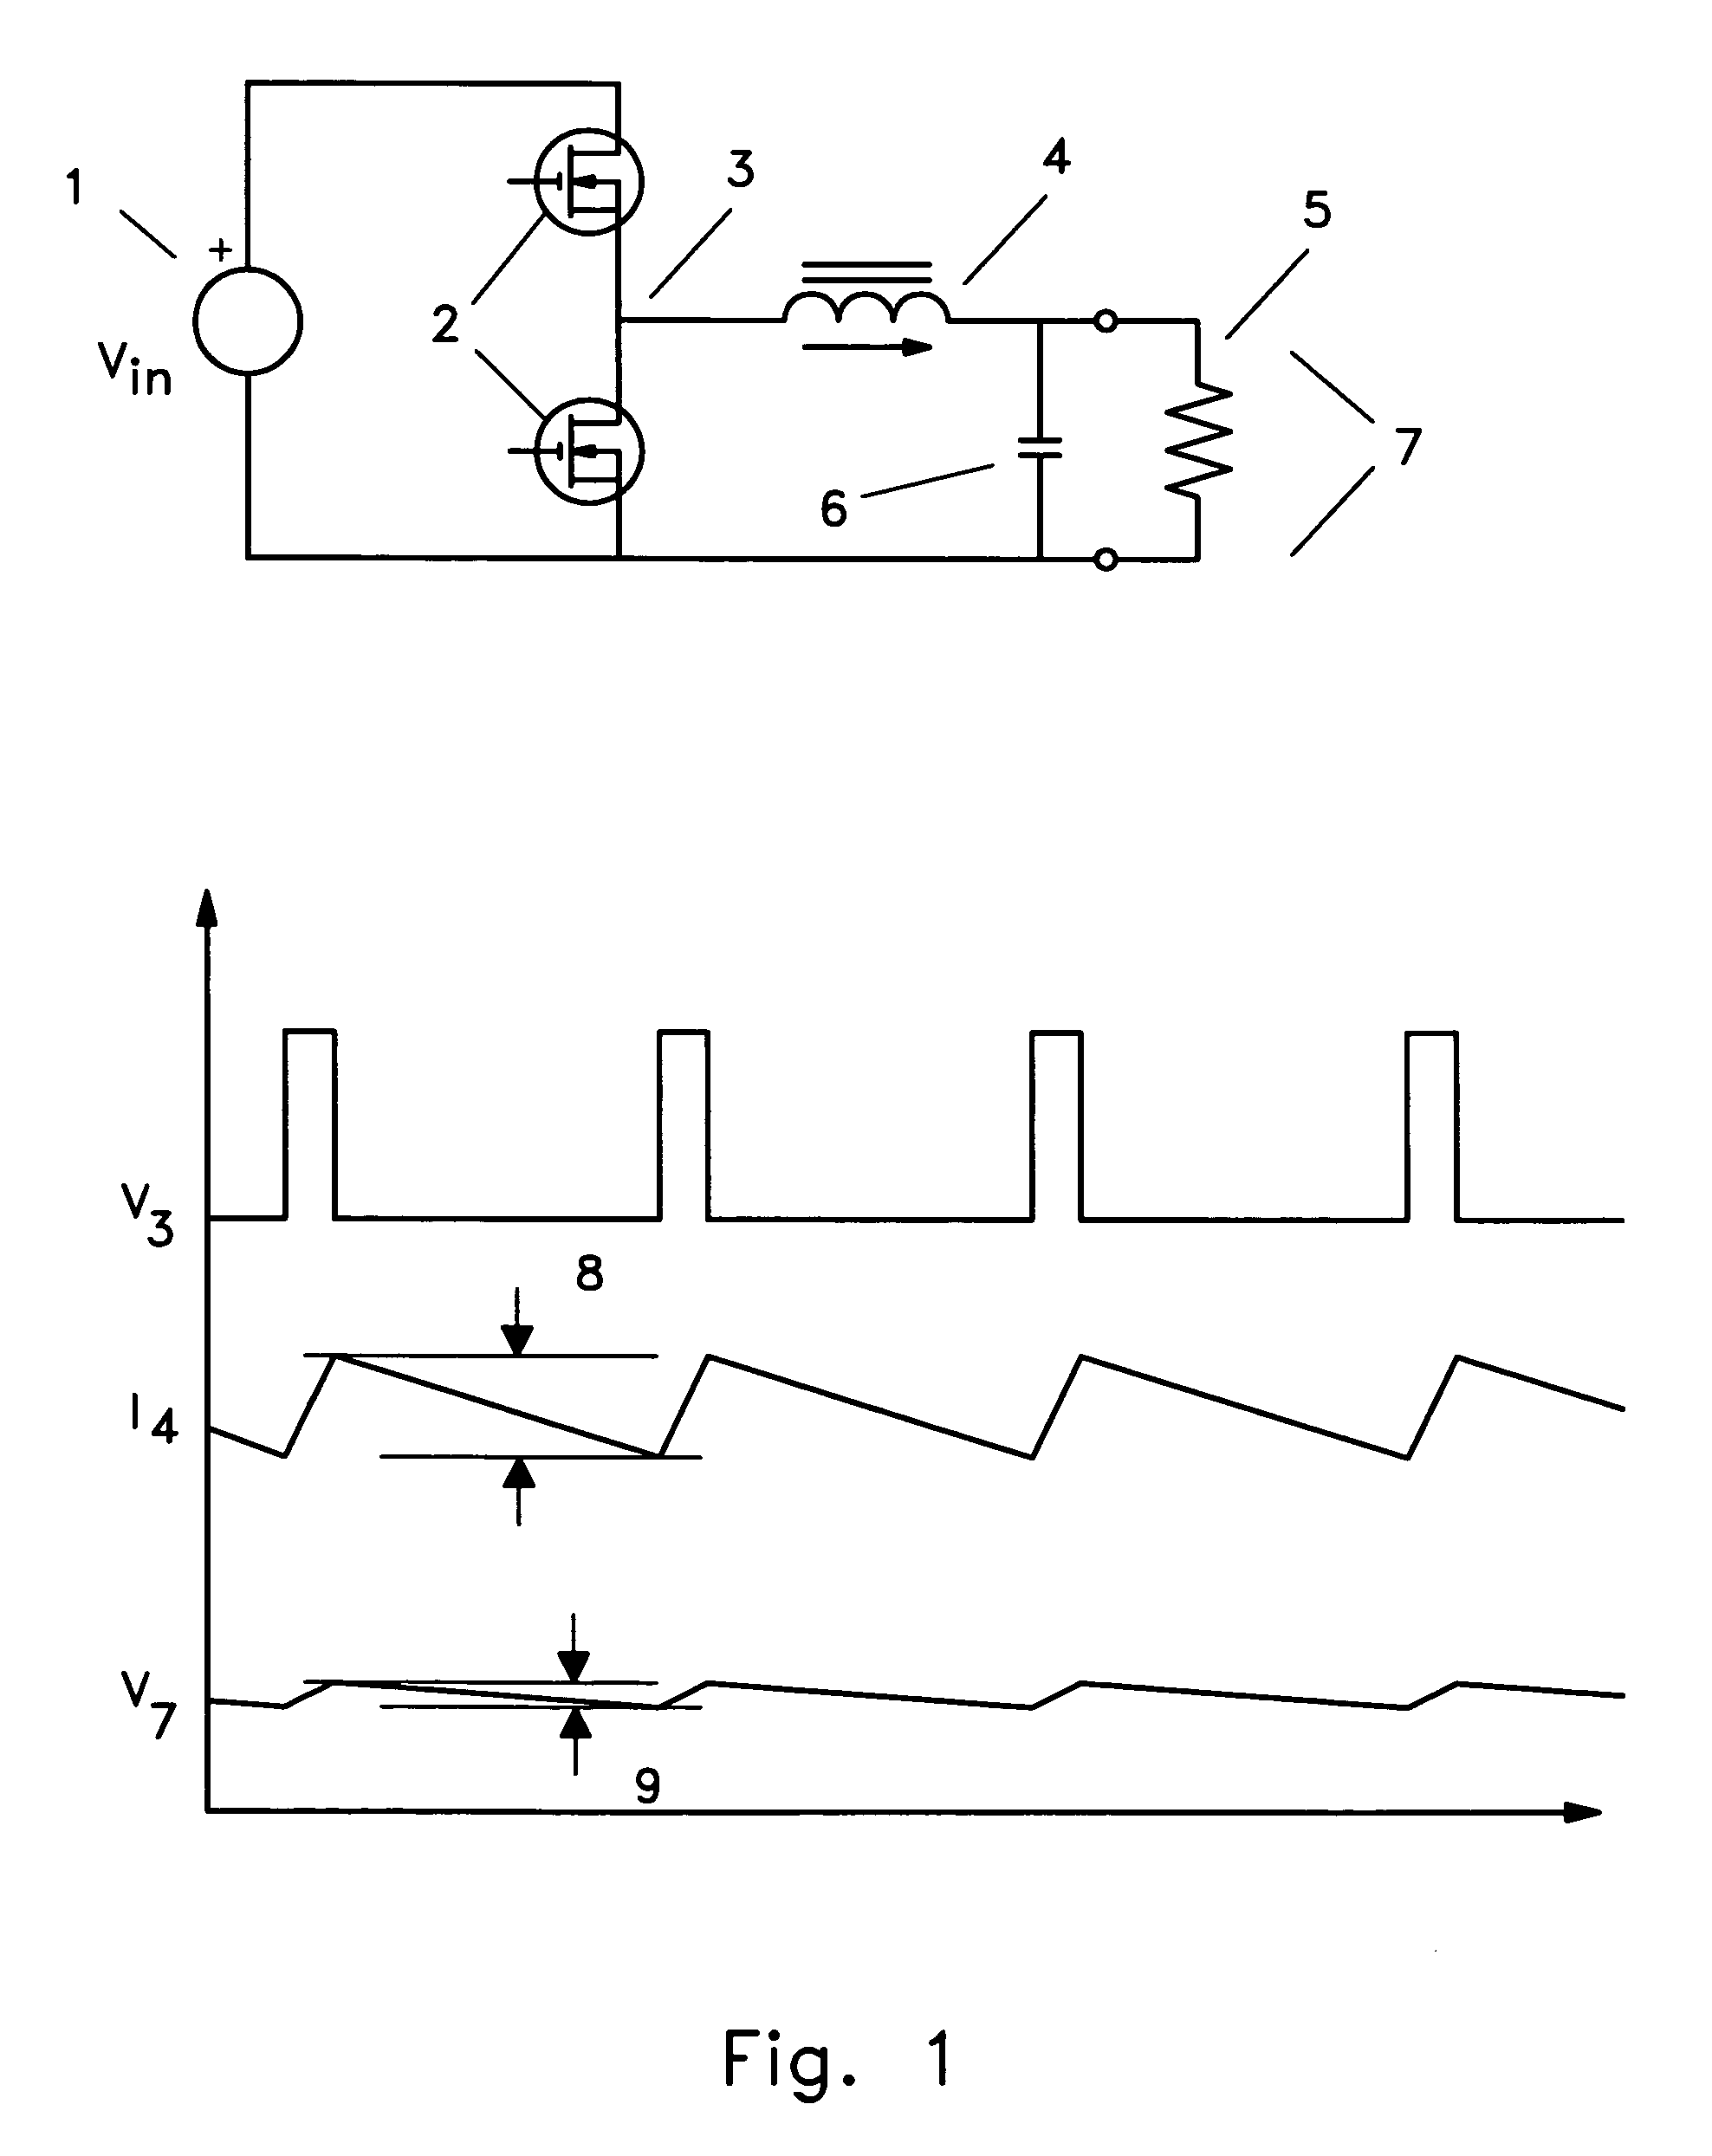 Multiple power converter system using combining transformers